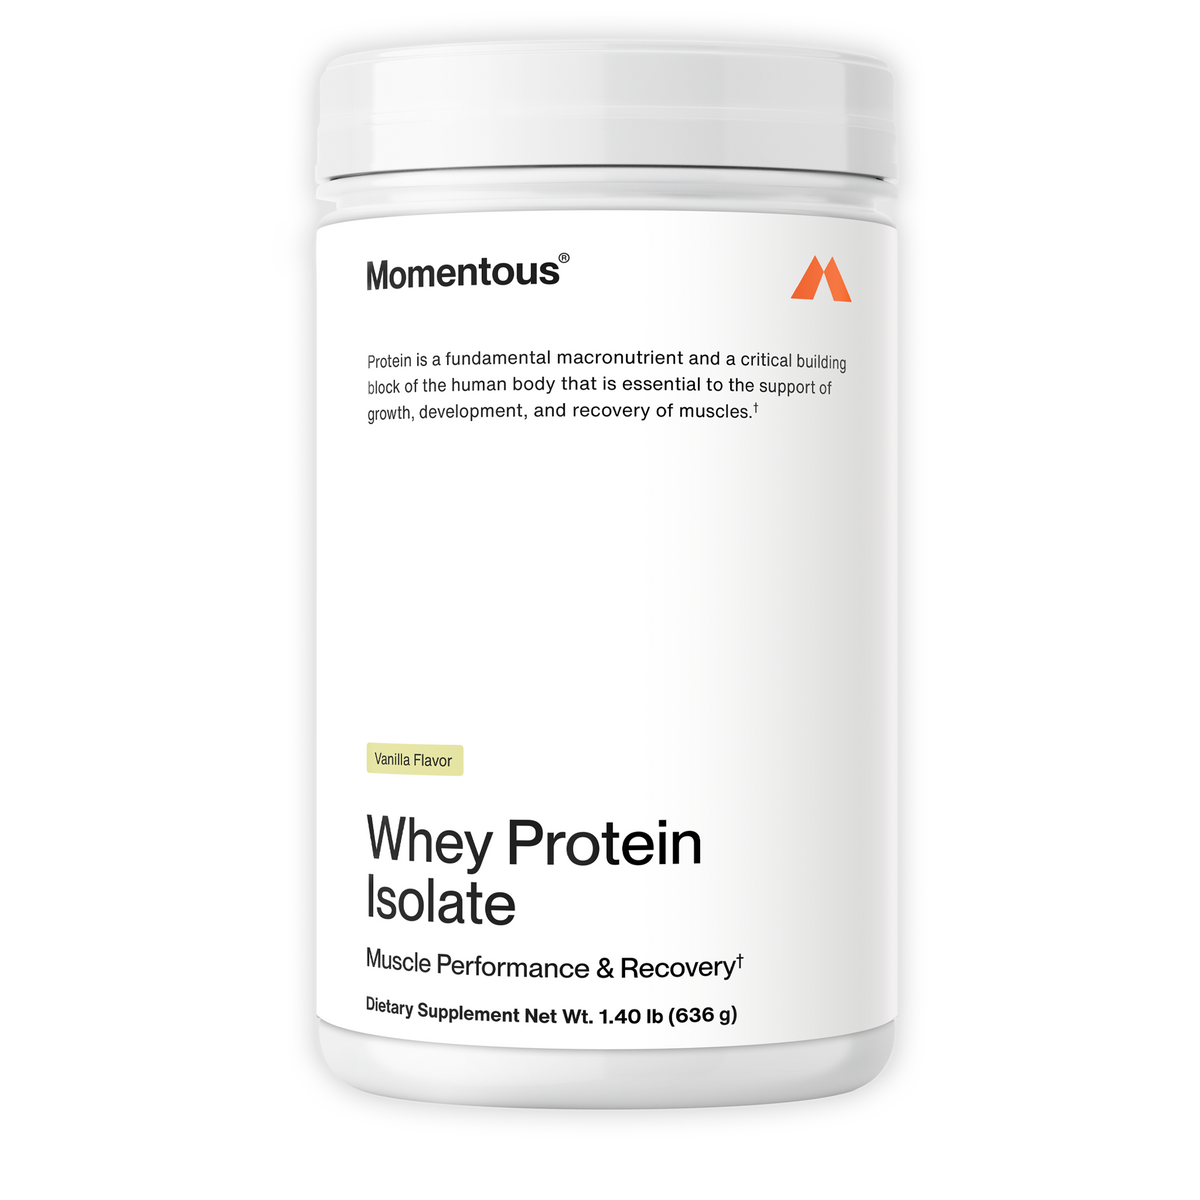 Grass Fed Whey Protein Isolate Powder - Exceptional Quality